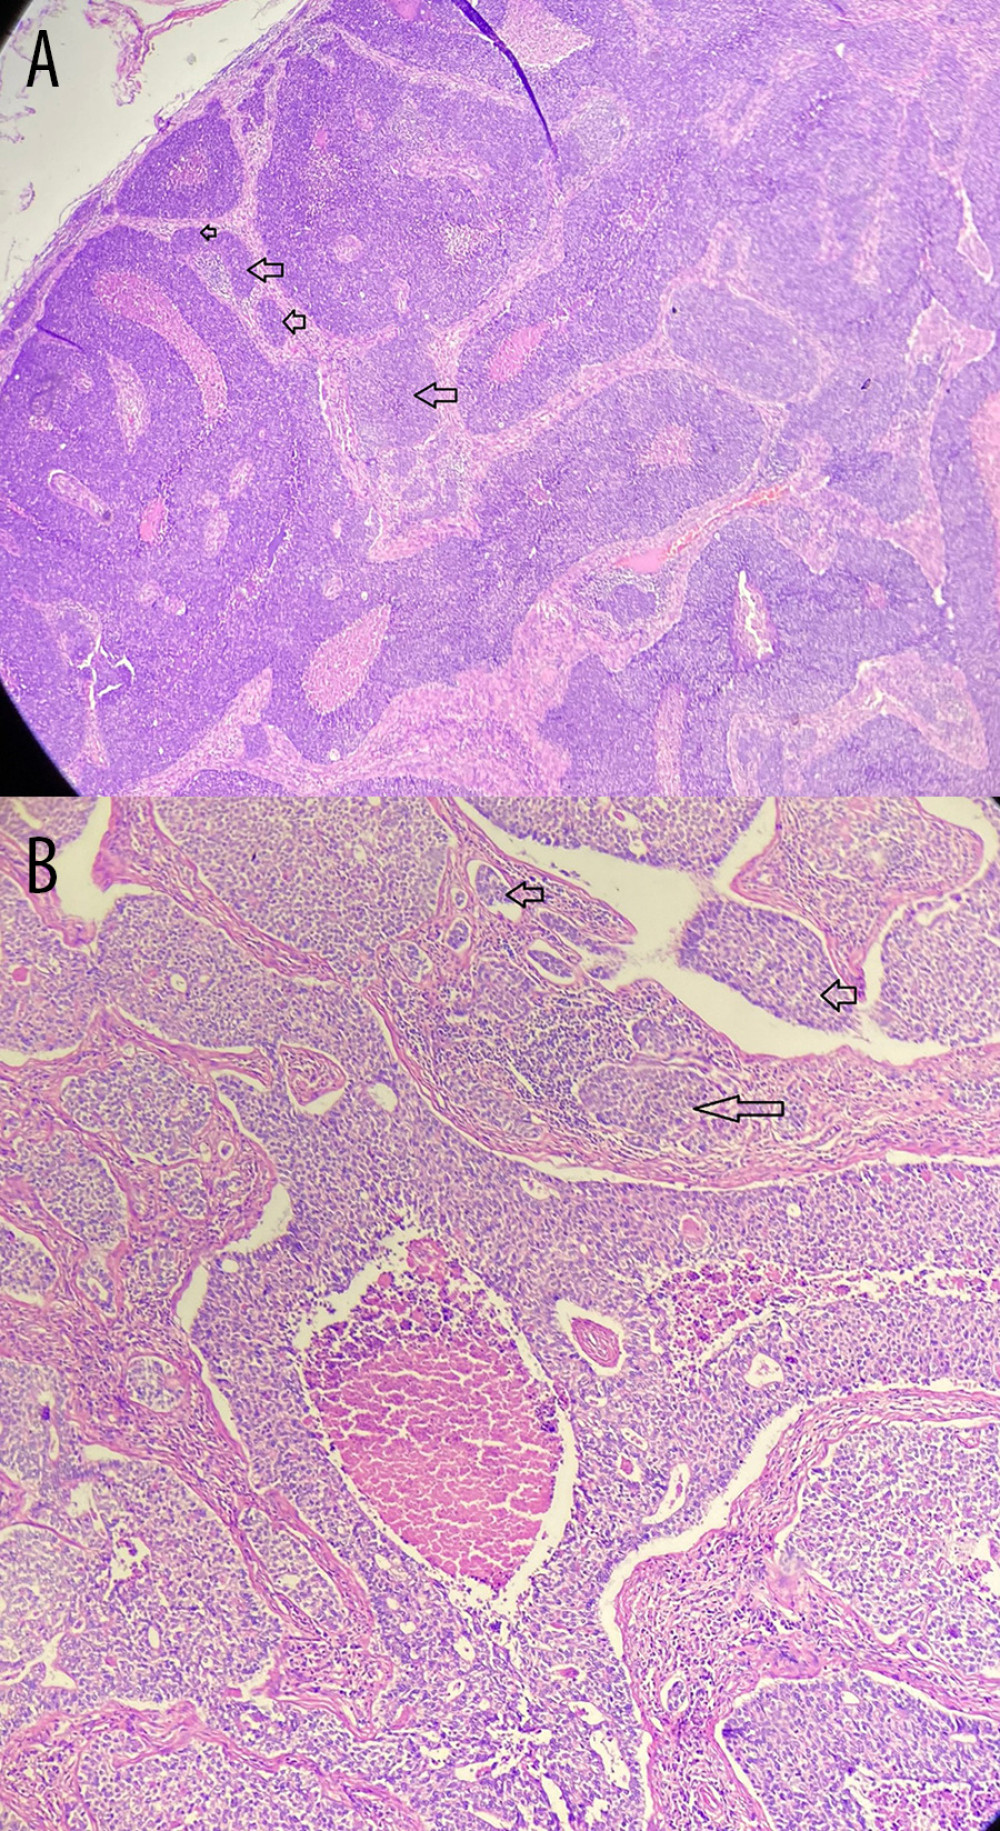 Microscopic appearance of pelvic lymph nodes. Pelvic lymph nodes were partially covered by connective tissue capsule. The subcapsular consisted of lymphoid stroma. Invading malignant tumor cells were seen (arrows). (A) Right pelvic lymph node. (B) Left pelvic lymph node.